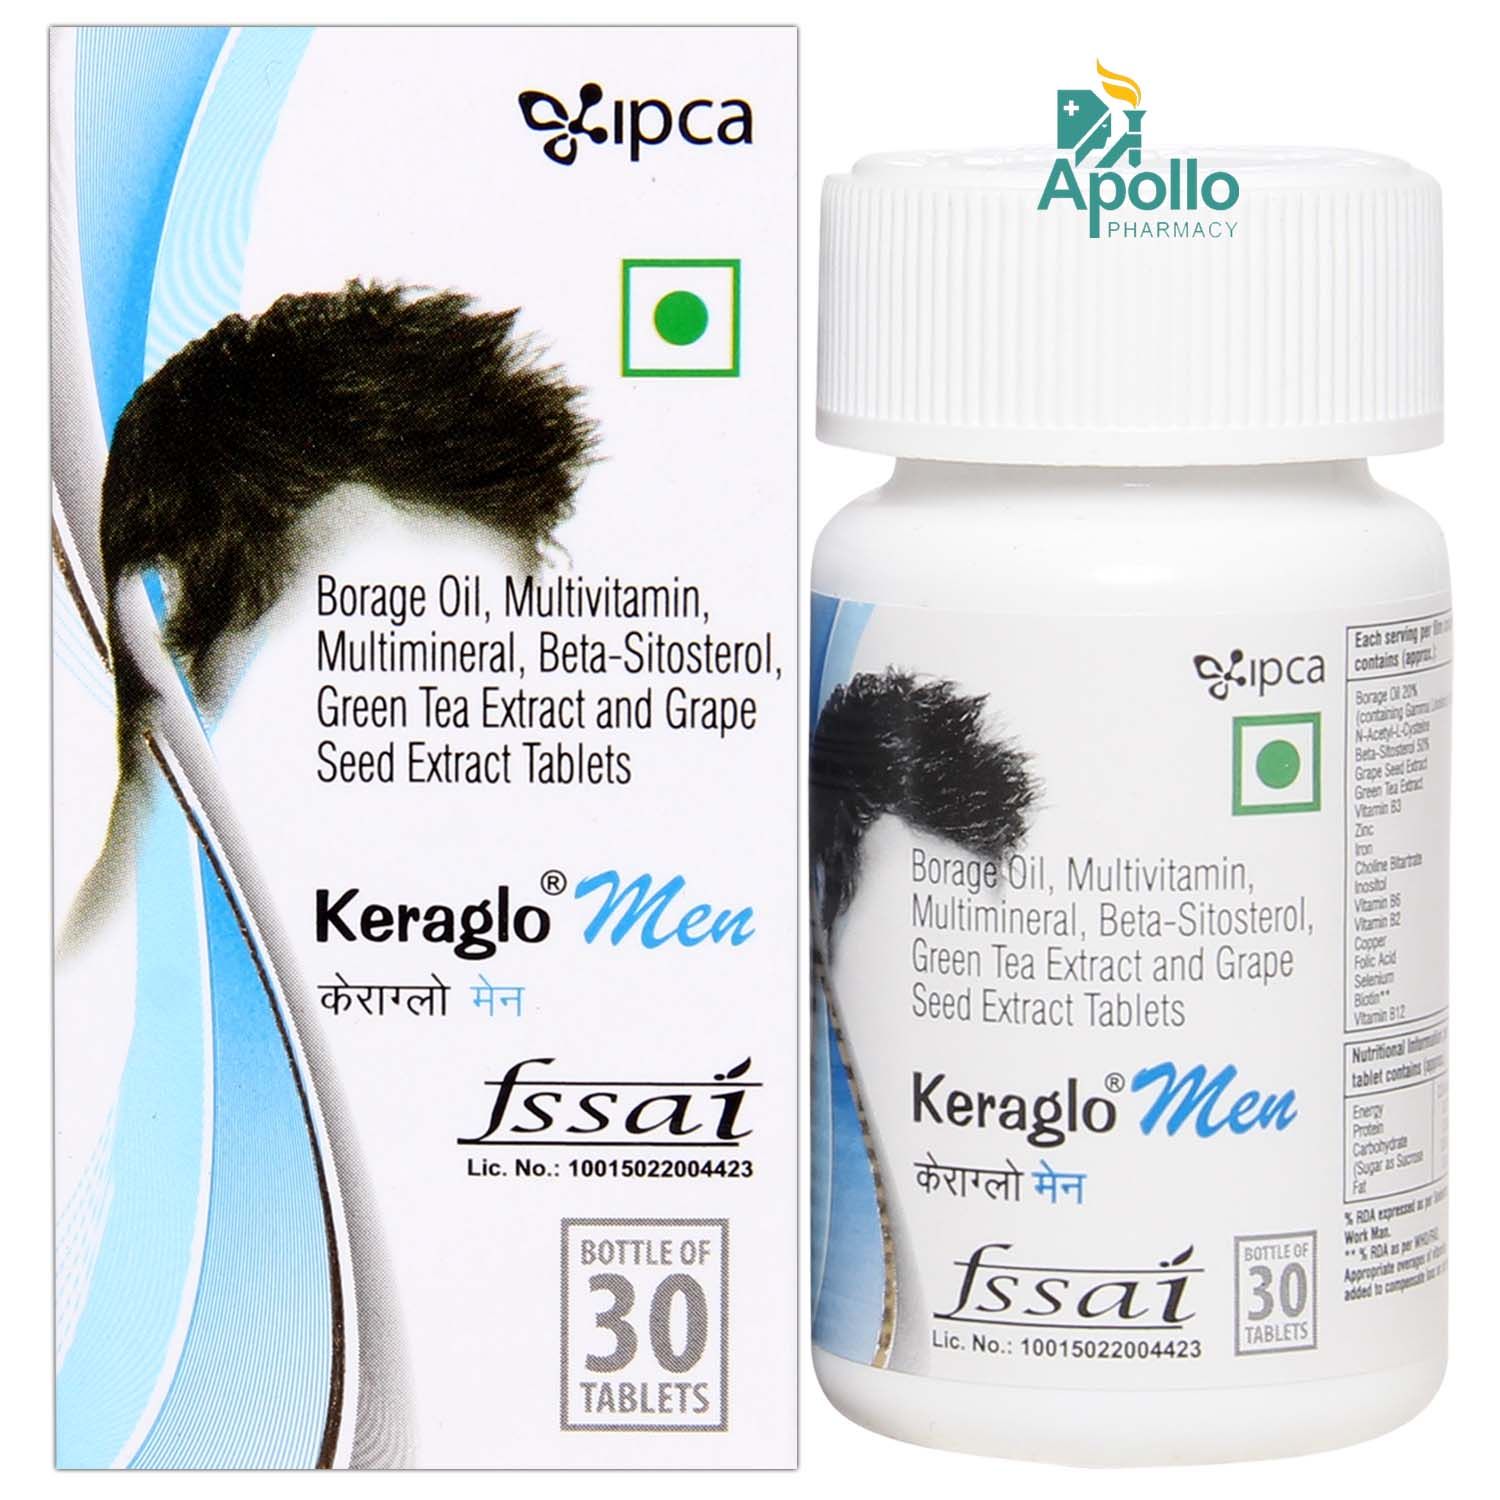 Keraglo Men, 30 Tablets Price, Uses, Side Effects, Composition - Apollo  Pharmacy